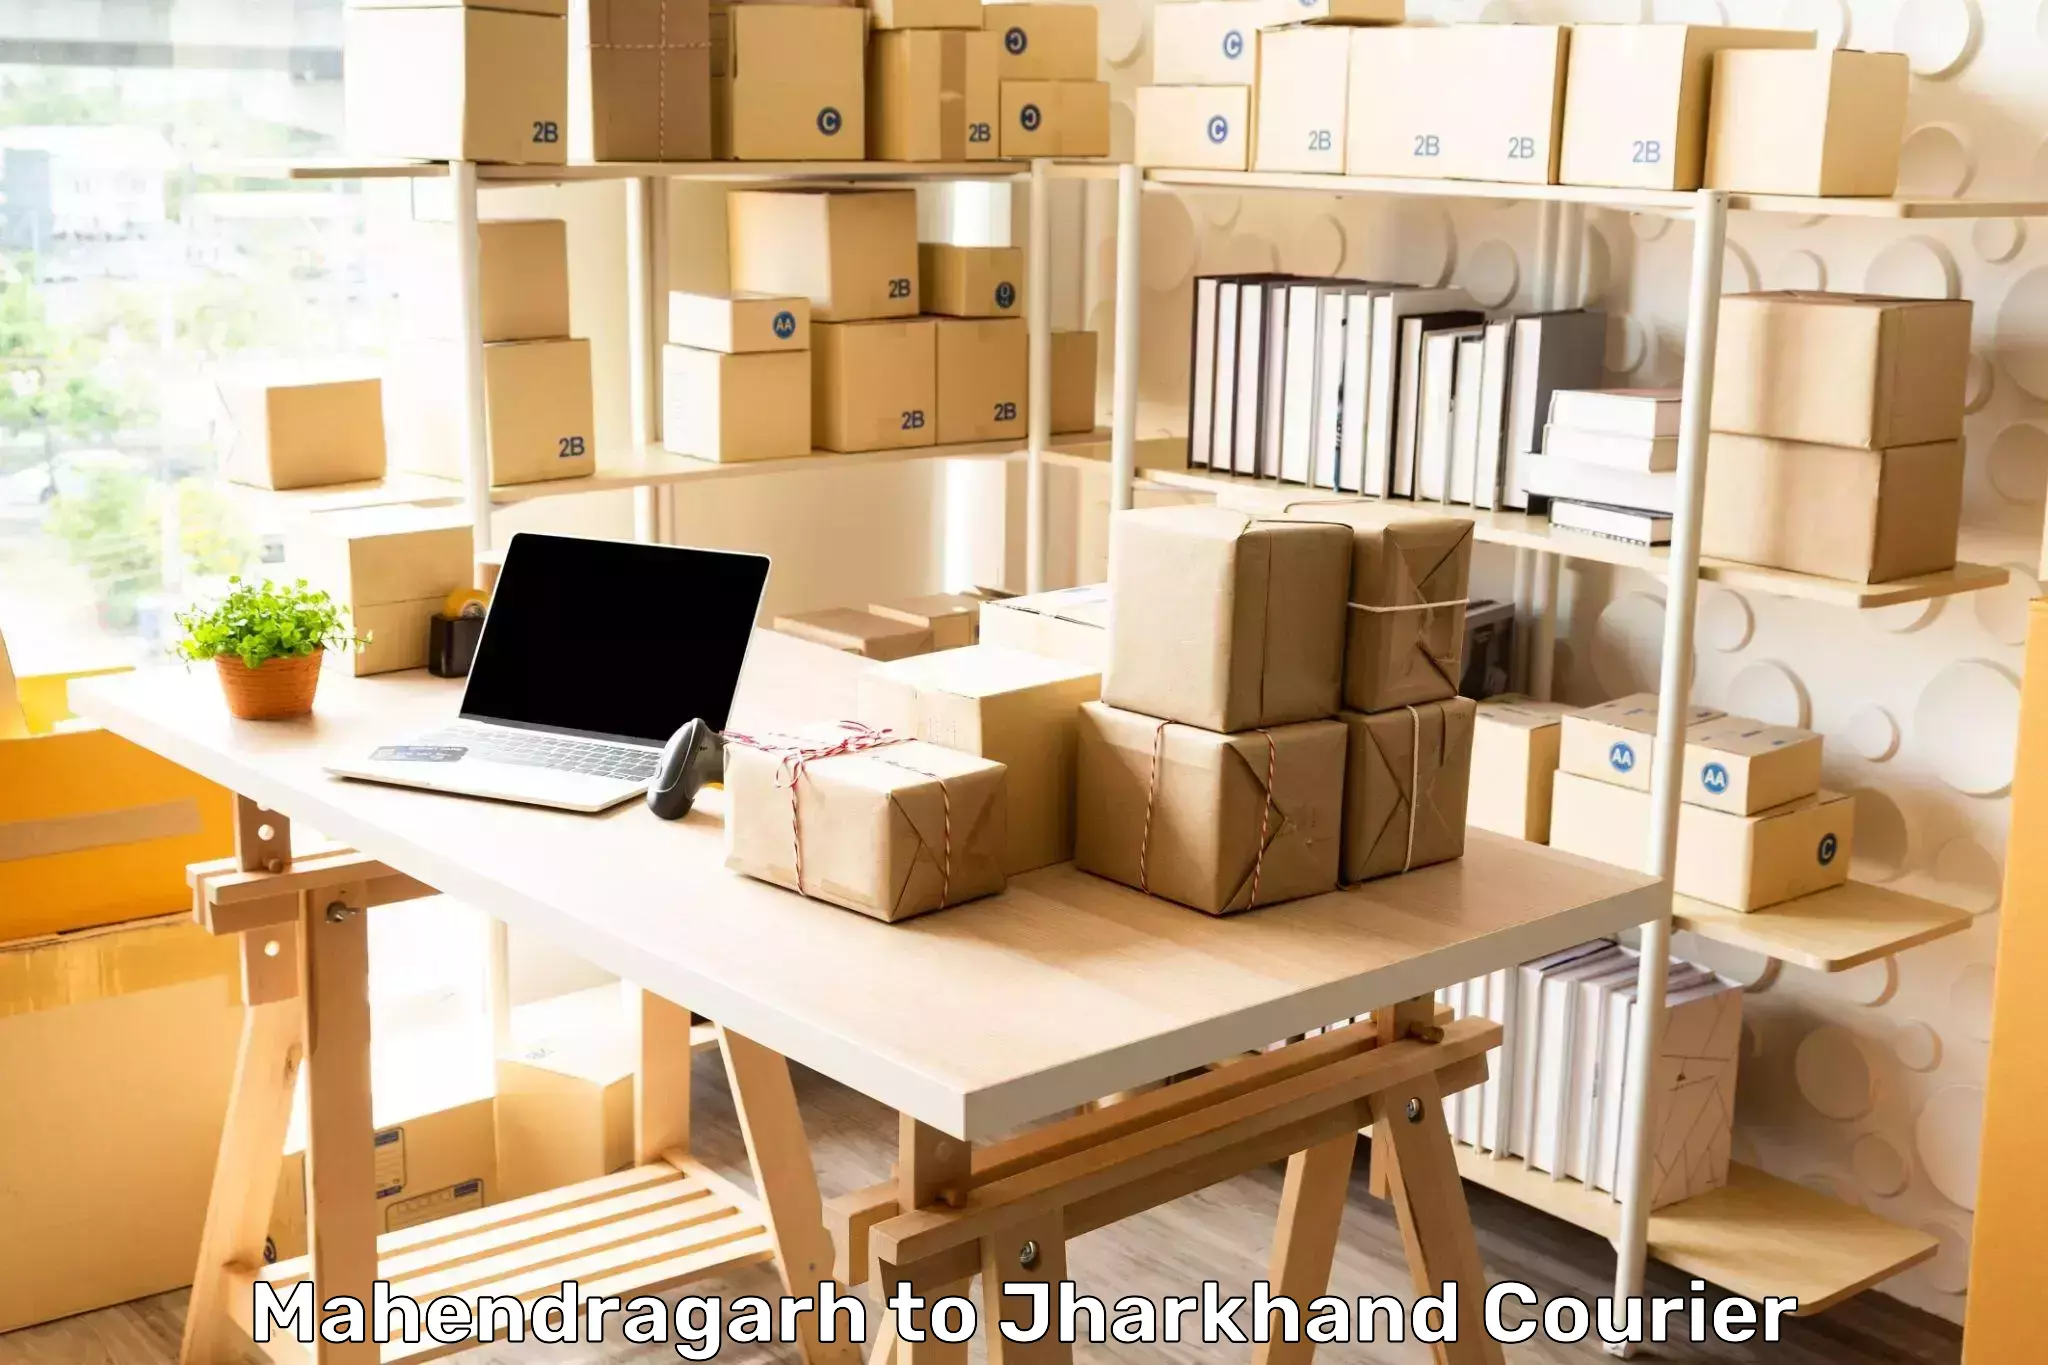 Cargo delivery service Mahendragarh to Jharkhand